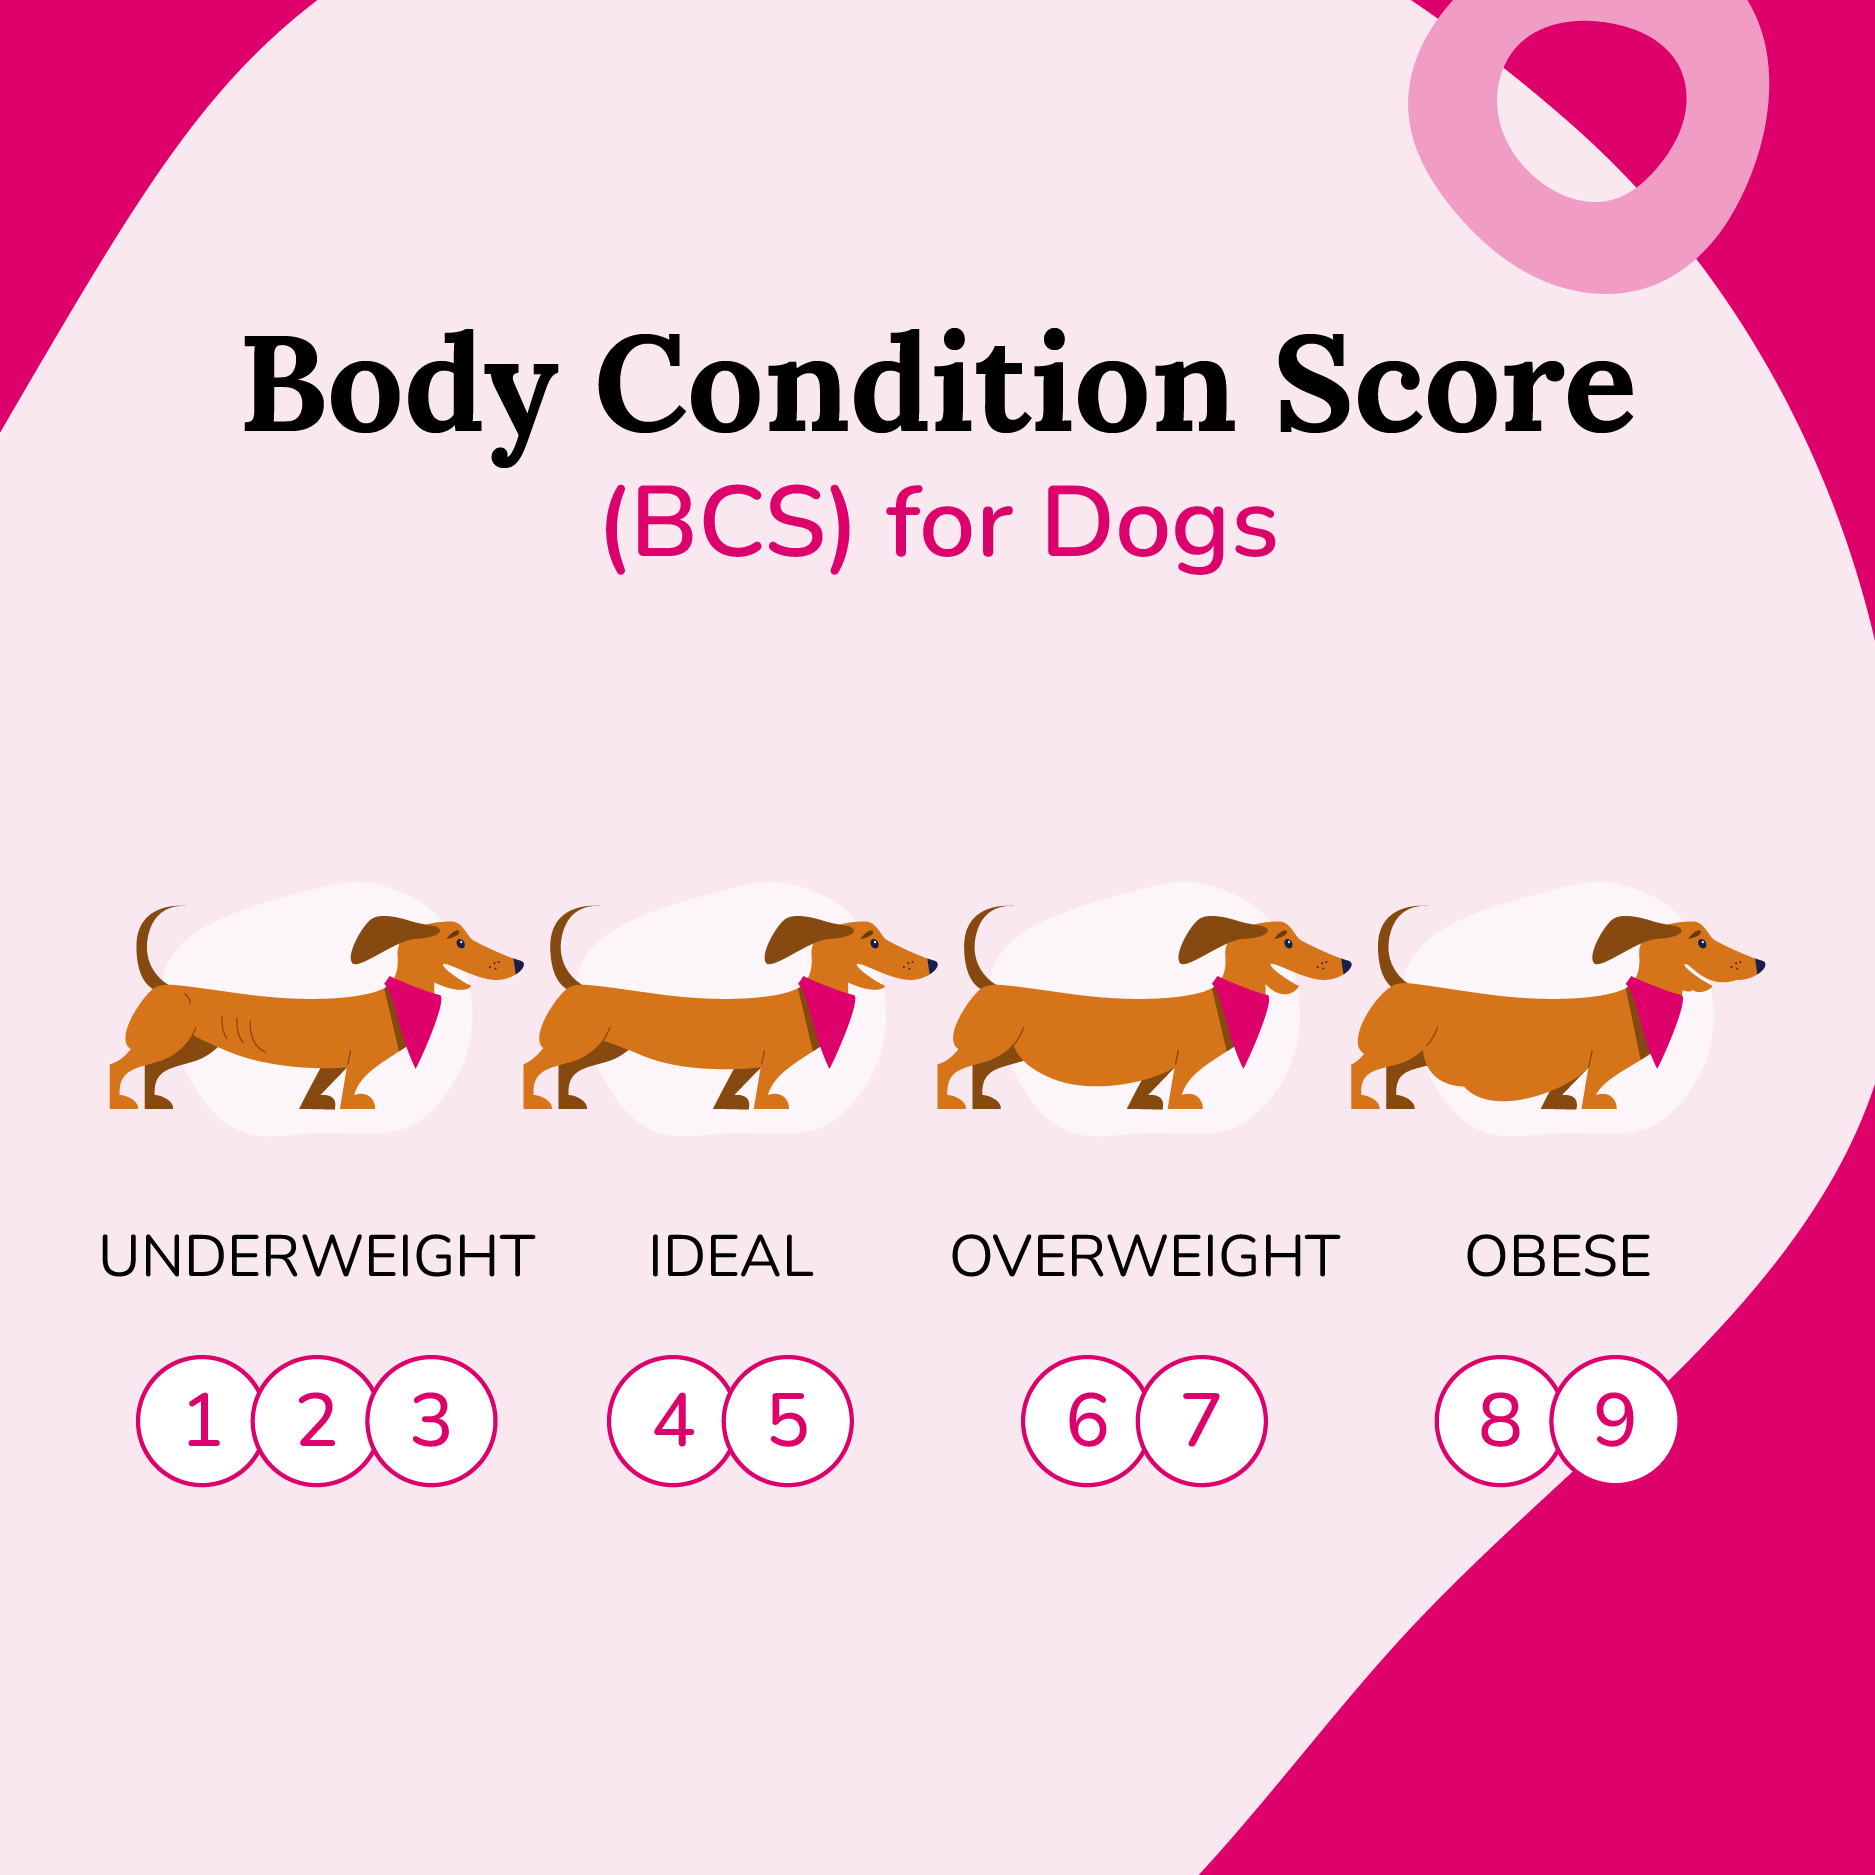 A body condition score (BCS) chart to determine ideal body weight in dogs.